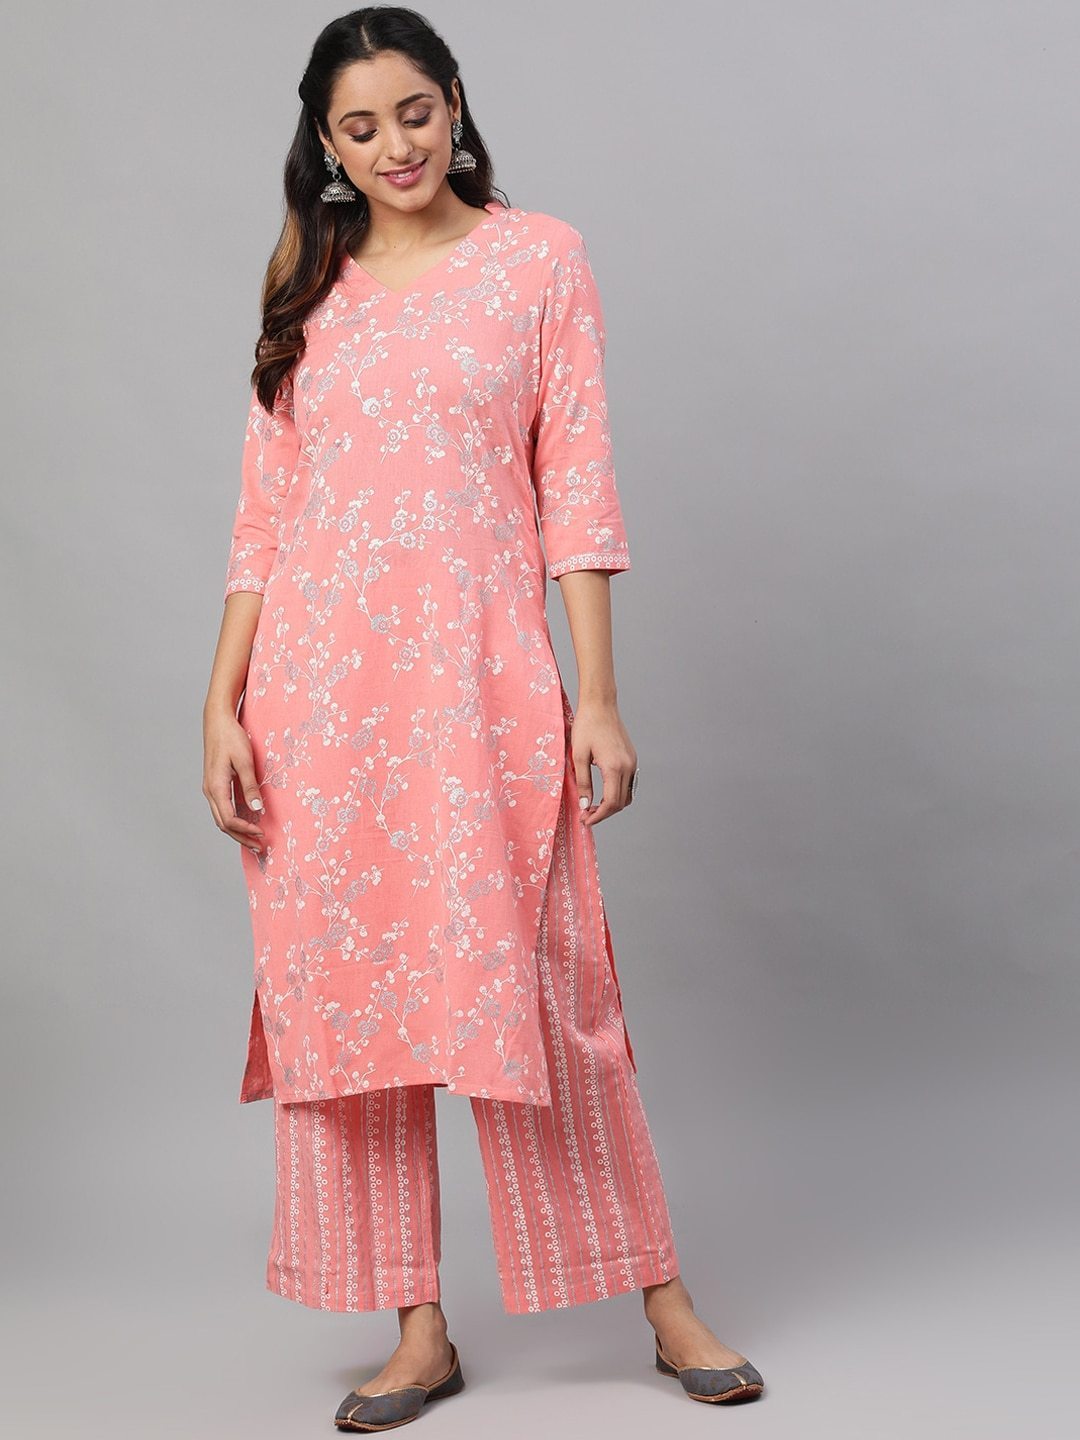 Women's  Peach-Coloured & Silver-Toned Printed Kurti with Palazzos - AKS